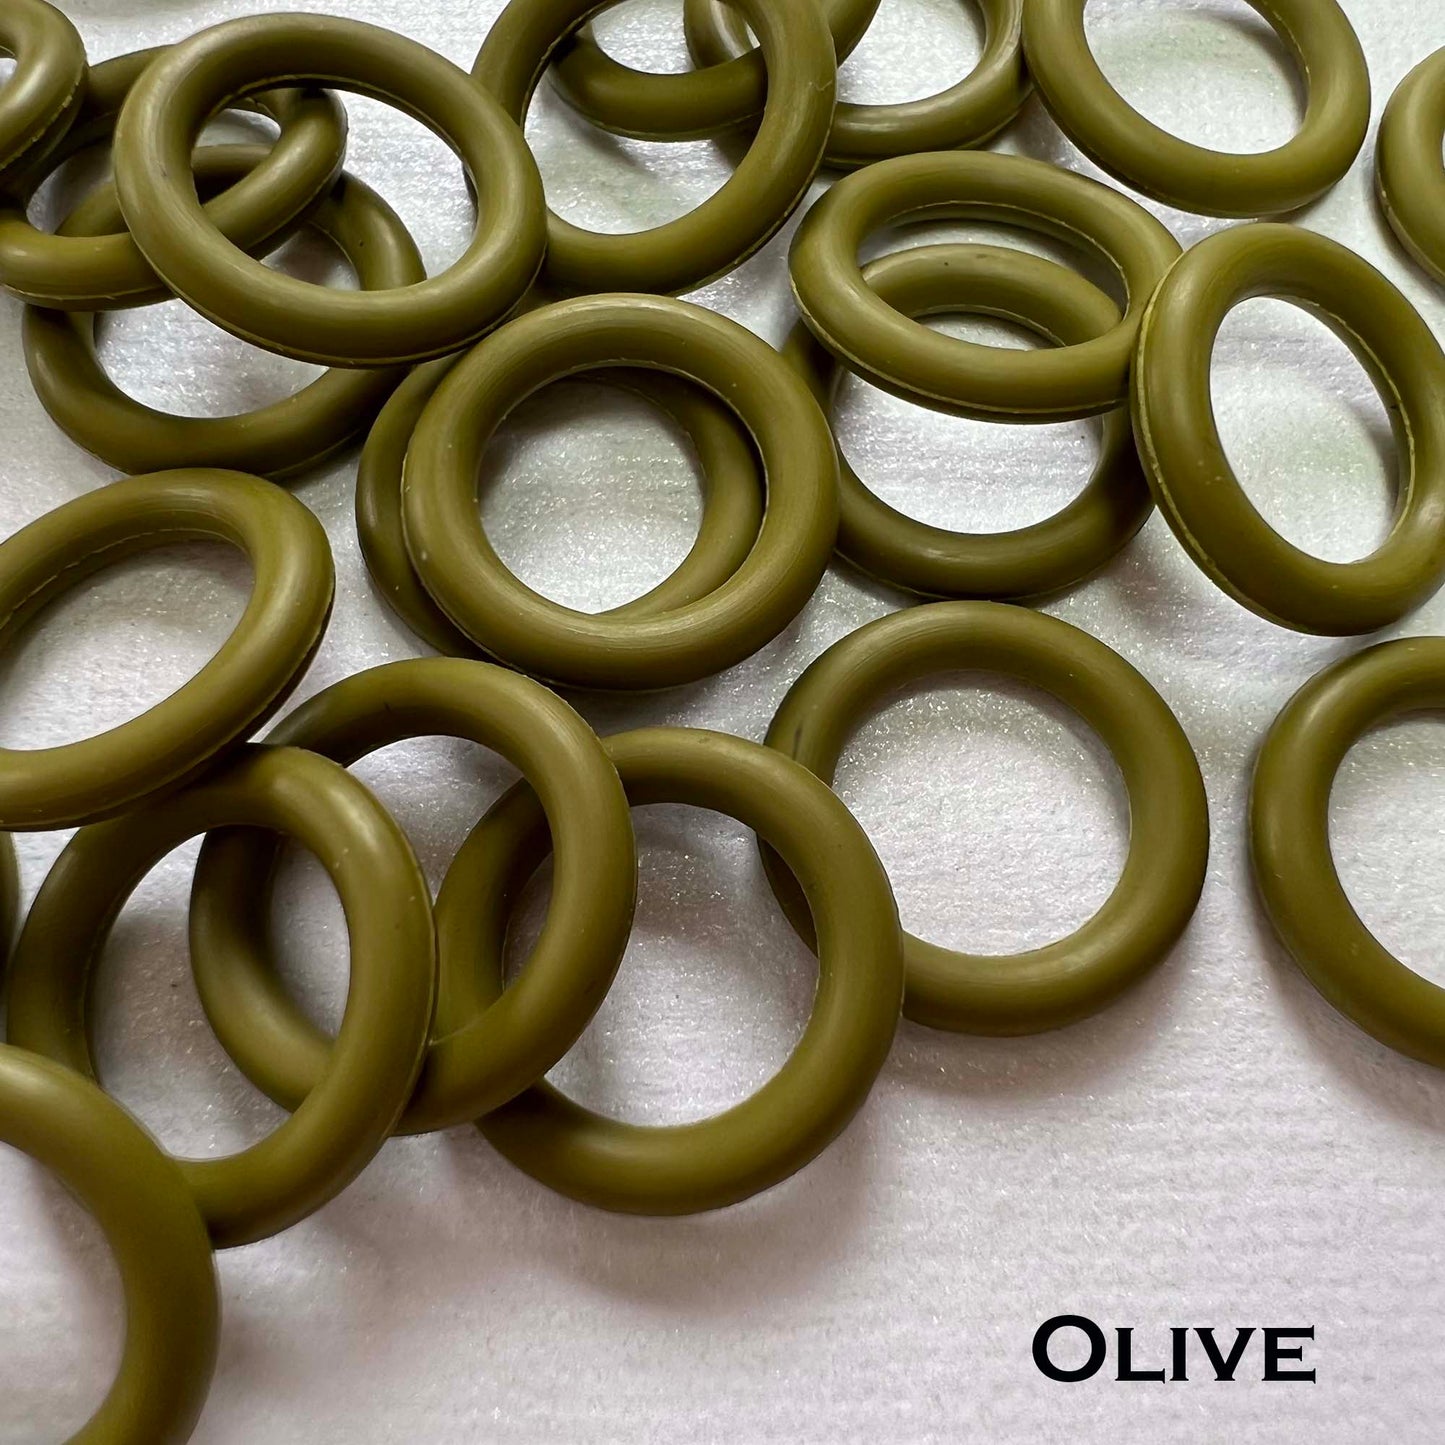 15mm Rubber O-Rings (ID: 10mm) - choose color & quantity